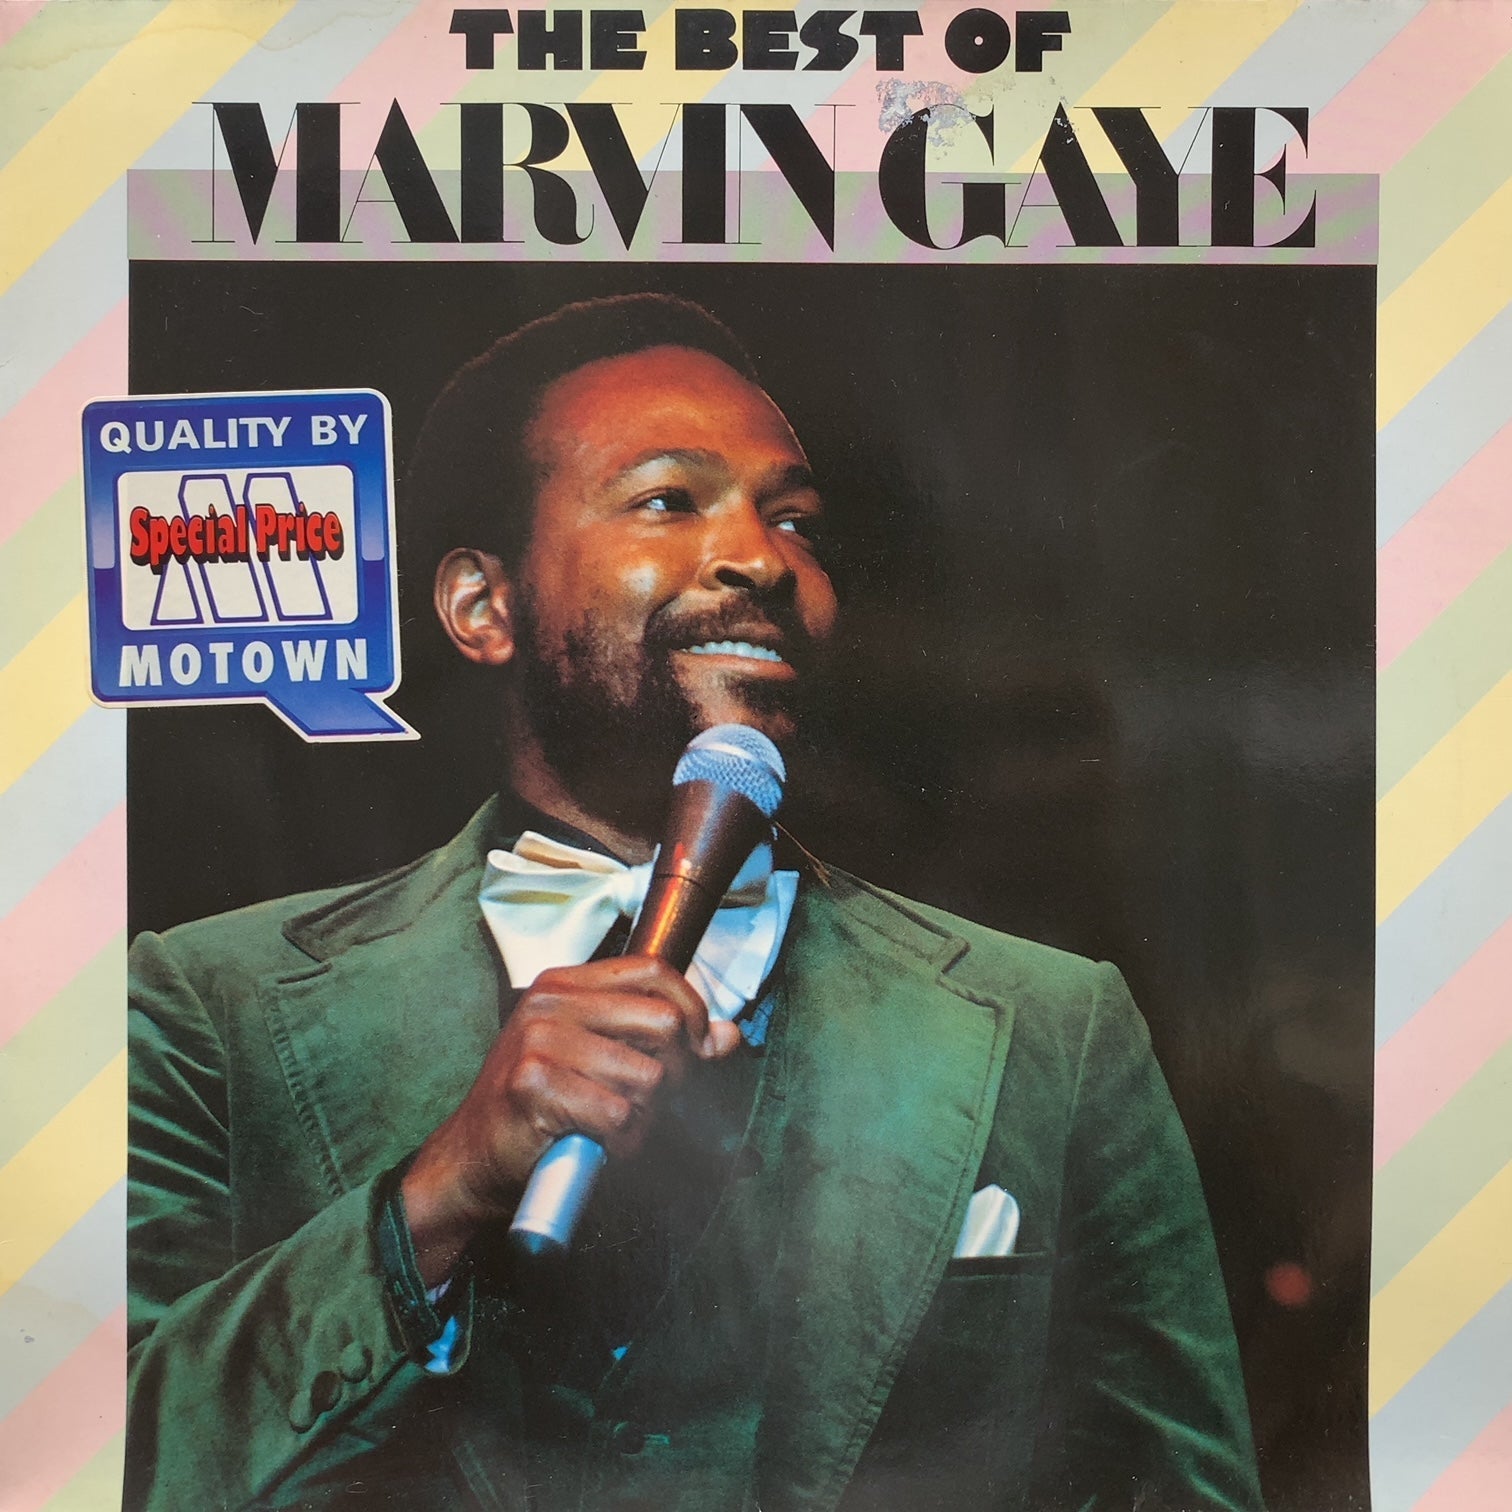 MARVIN GAYE / The Best Of Marvin Gaye (Motown